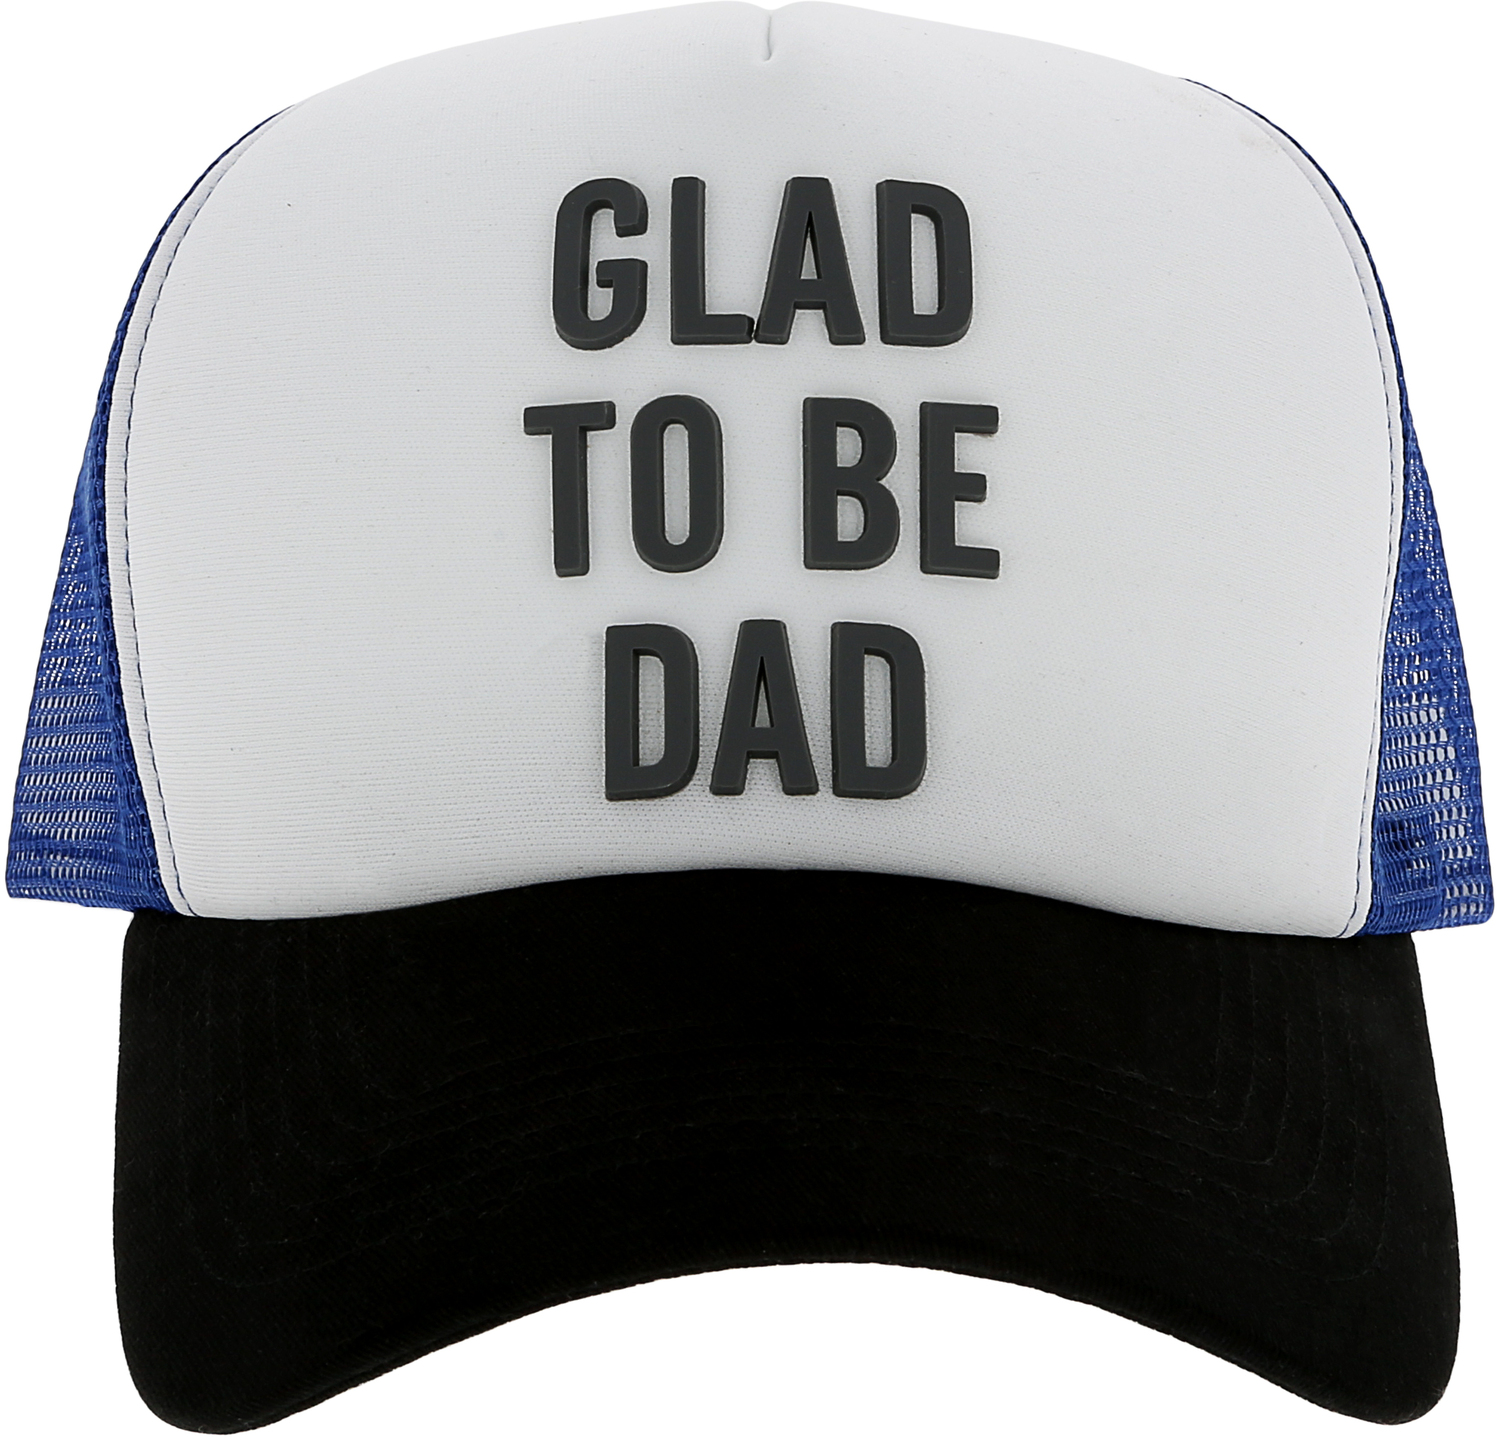 Glad to be Dad by Man Made - Glad to be Dad -  Royal Blue Mesh Adjustable Trucker Hat